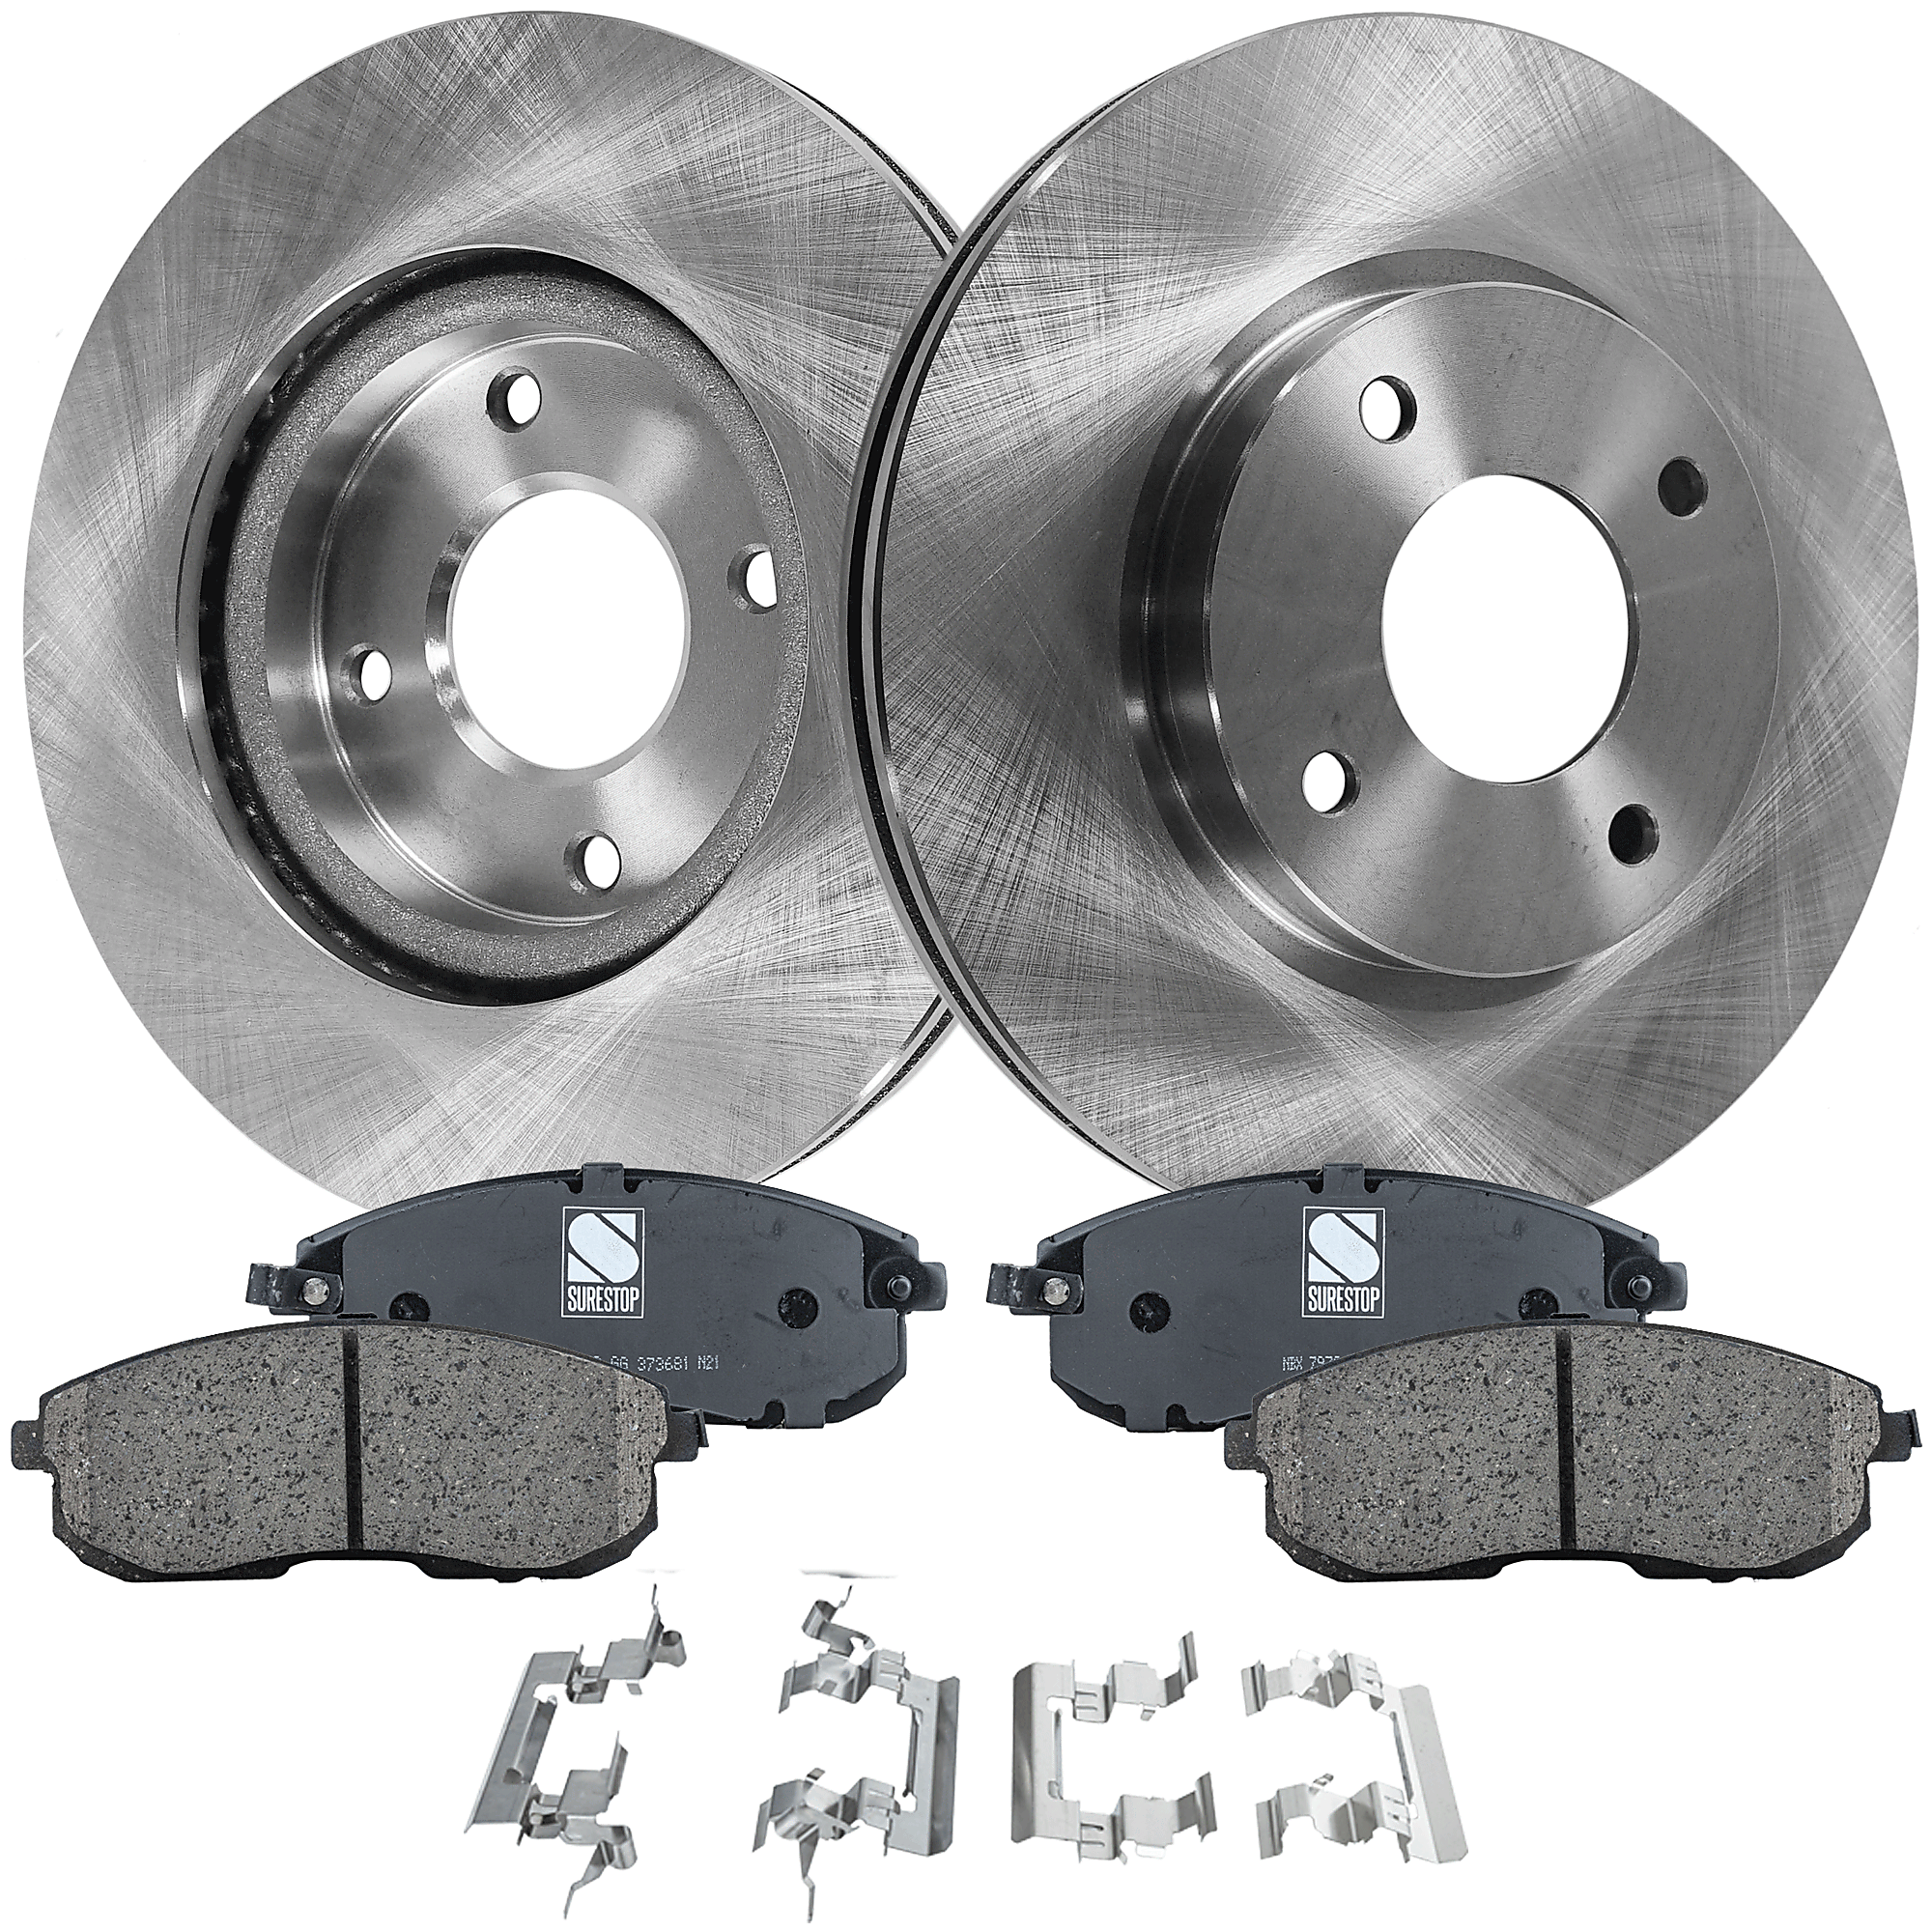 2008 Fits Nissan Versa w/o ABS OE Replacement Rotors w/Ceramic Pads F